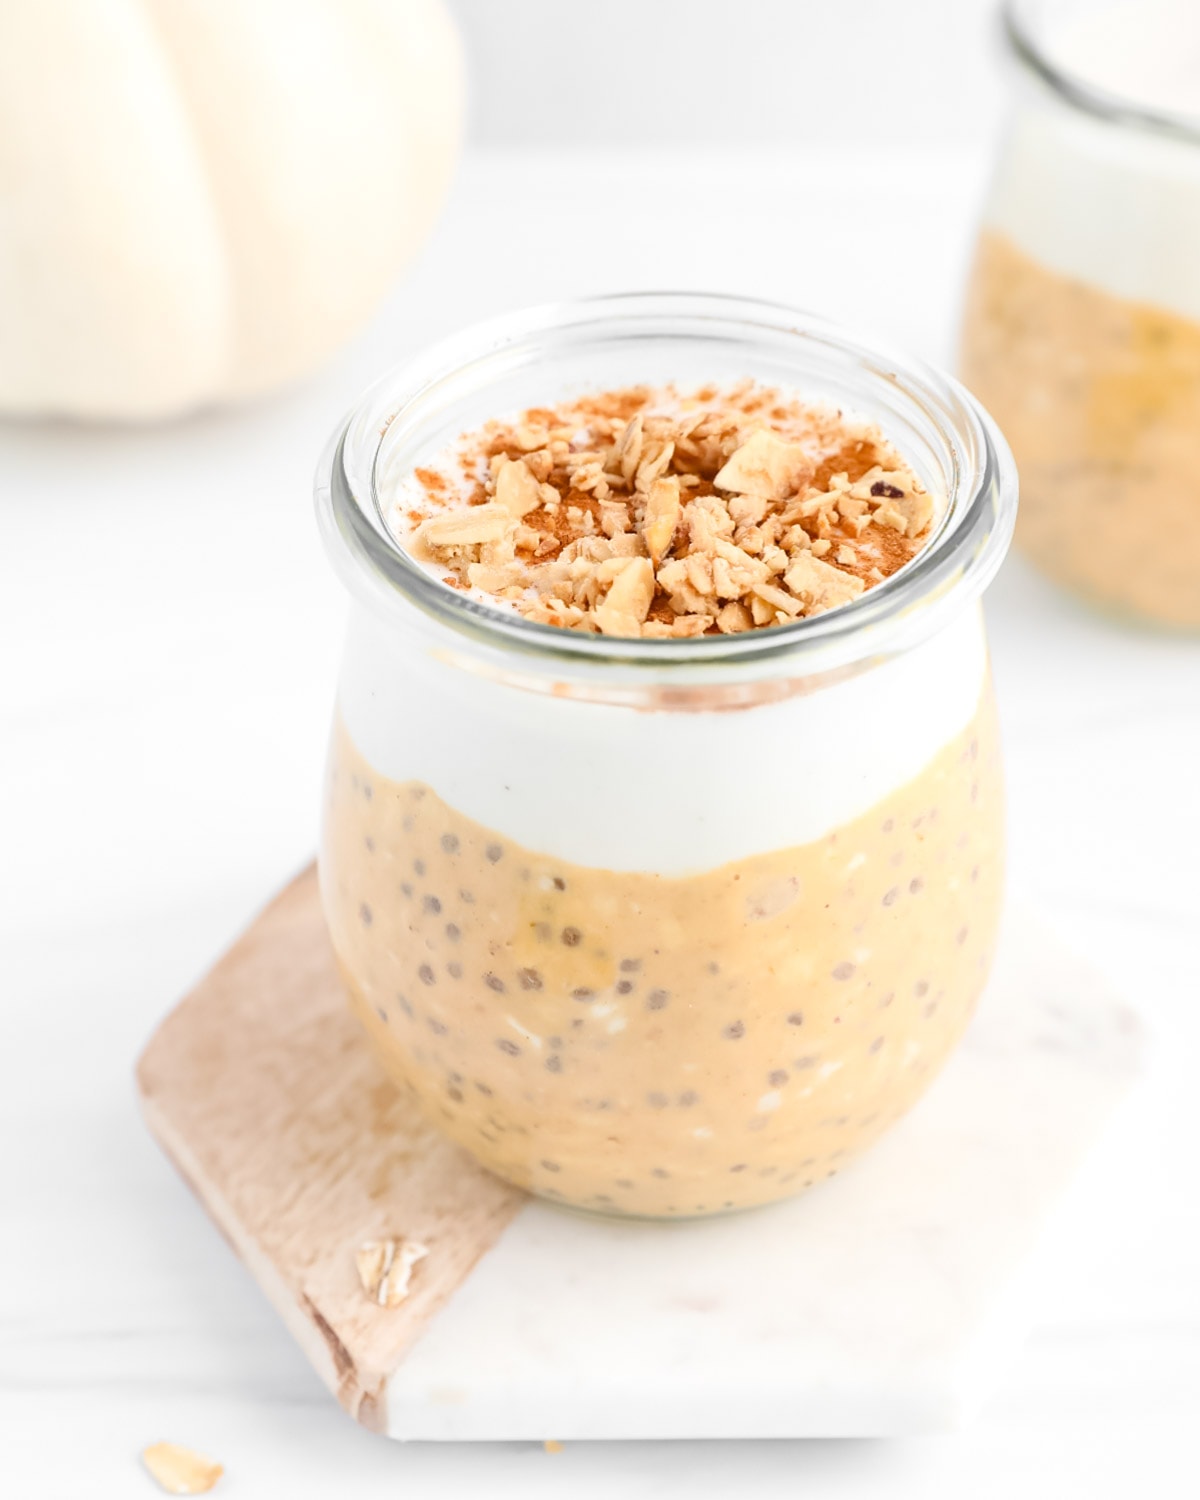 A clear glass filled with overnight oats, vanilla, and granola.